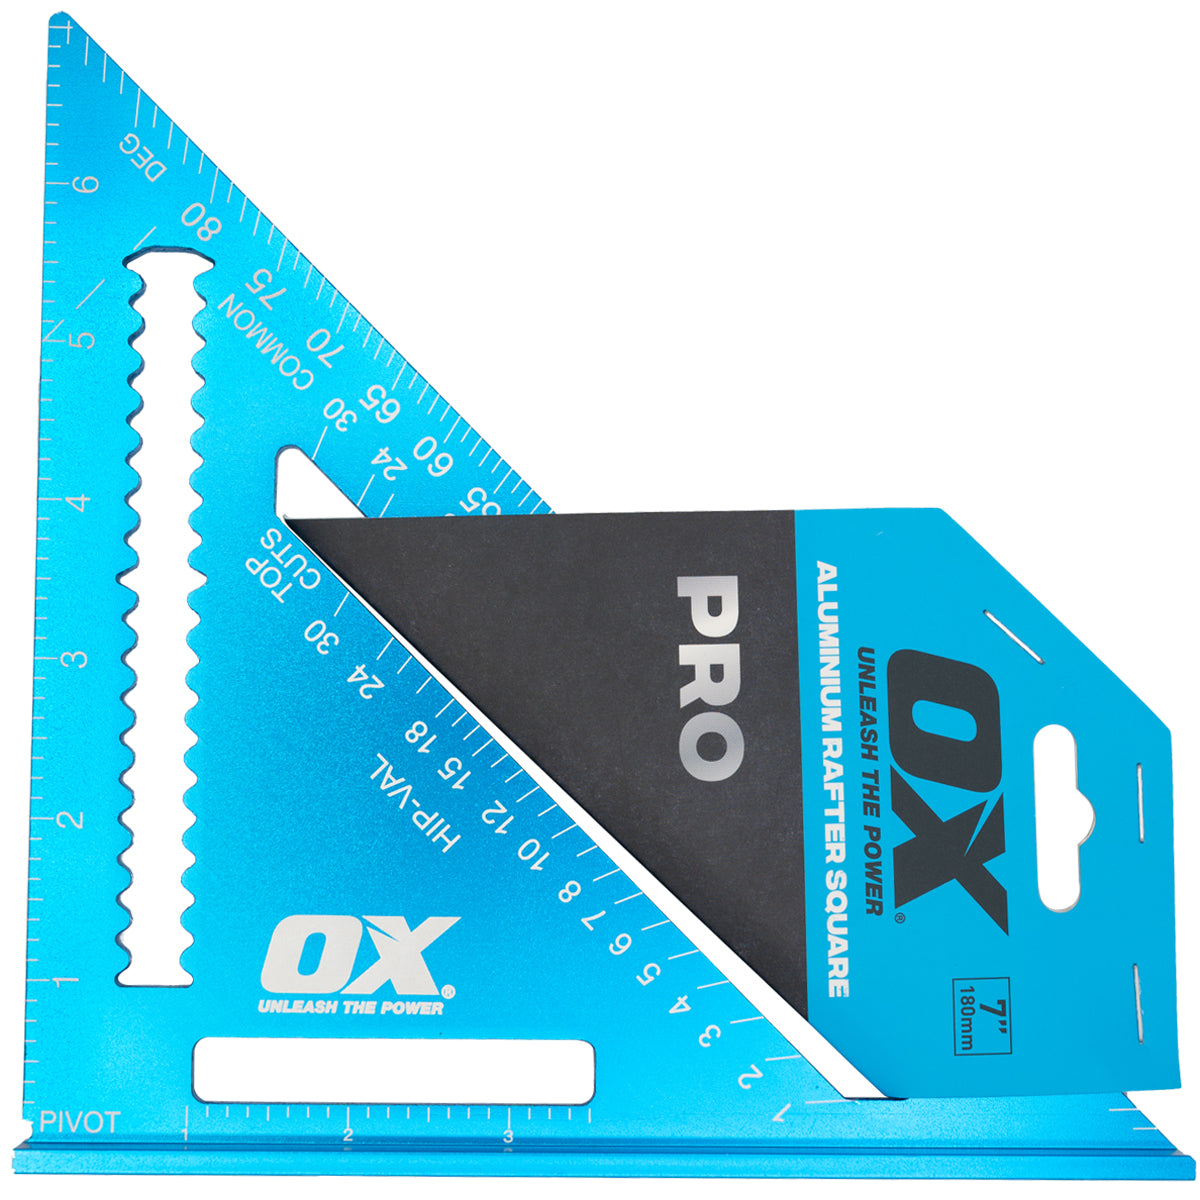 Pro Aluminum Rafter Square | 7-Inch / 180mm